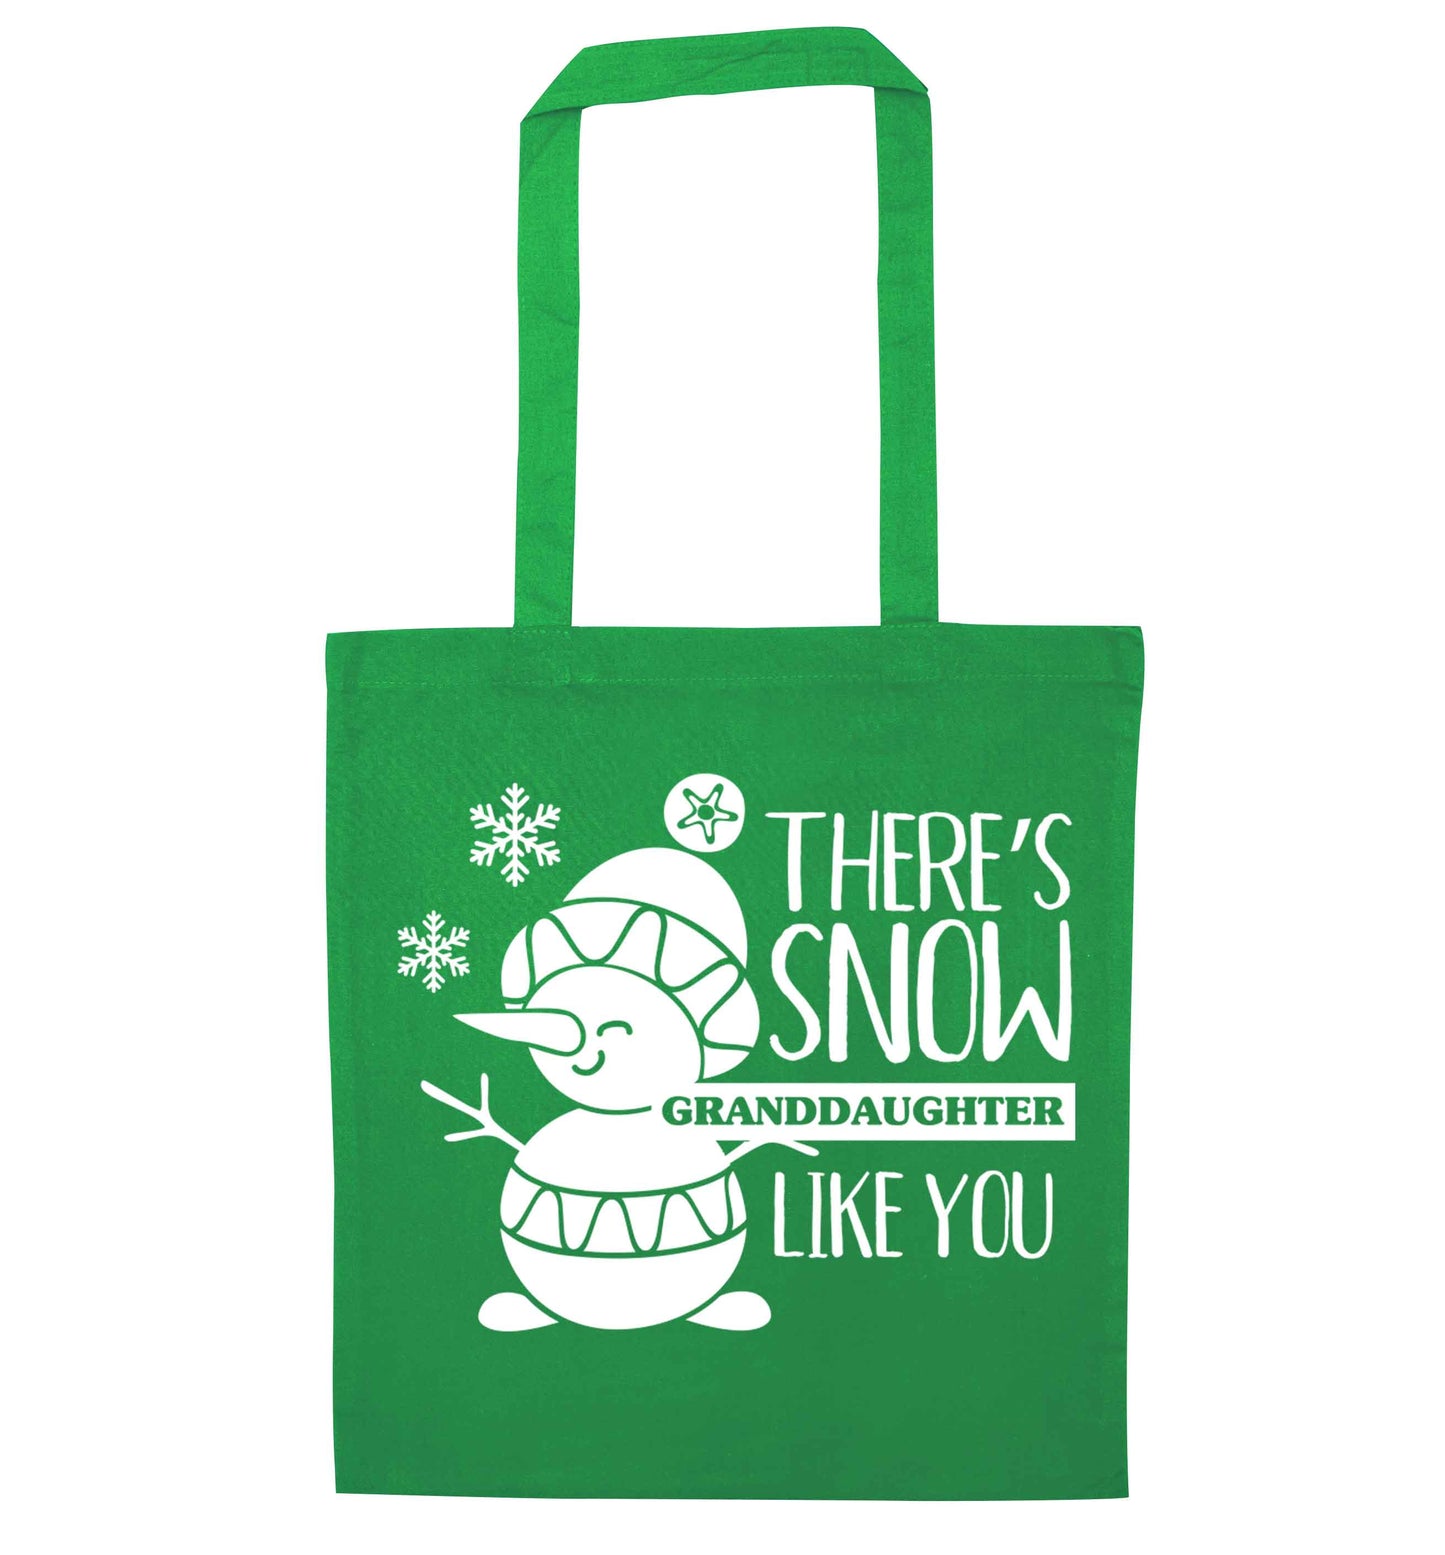 There's snow granddaughter like you green tote bag